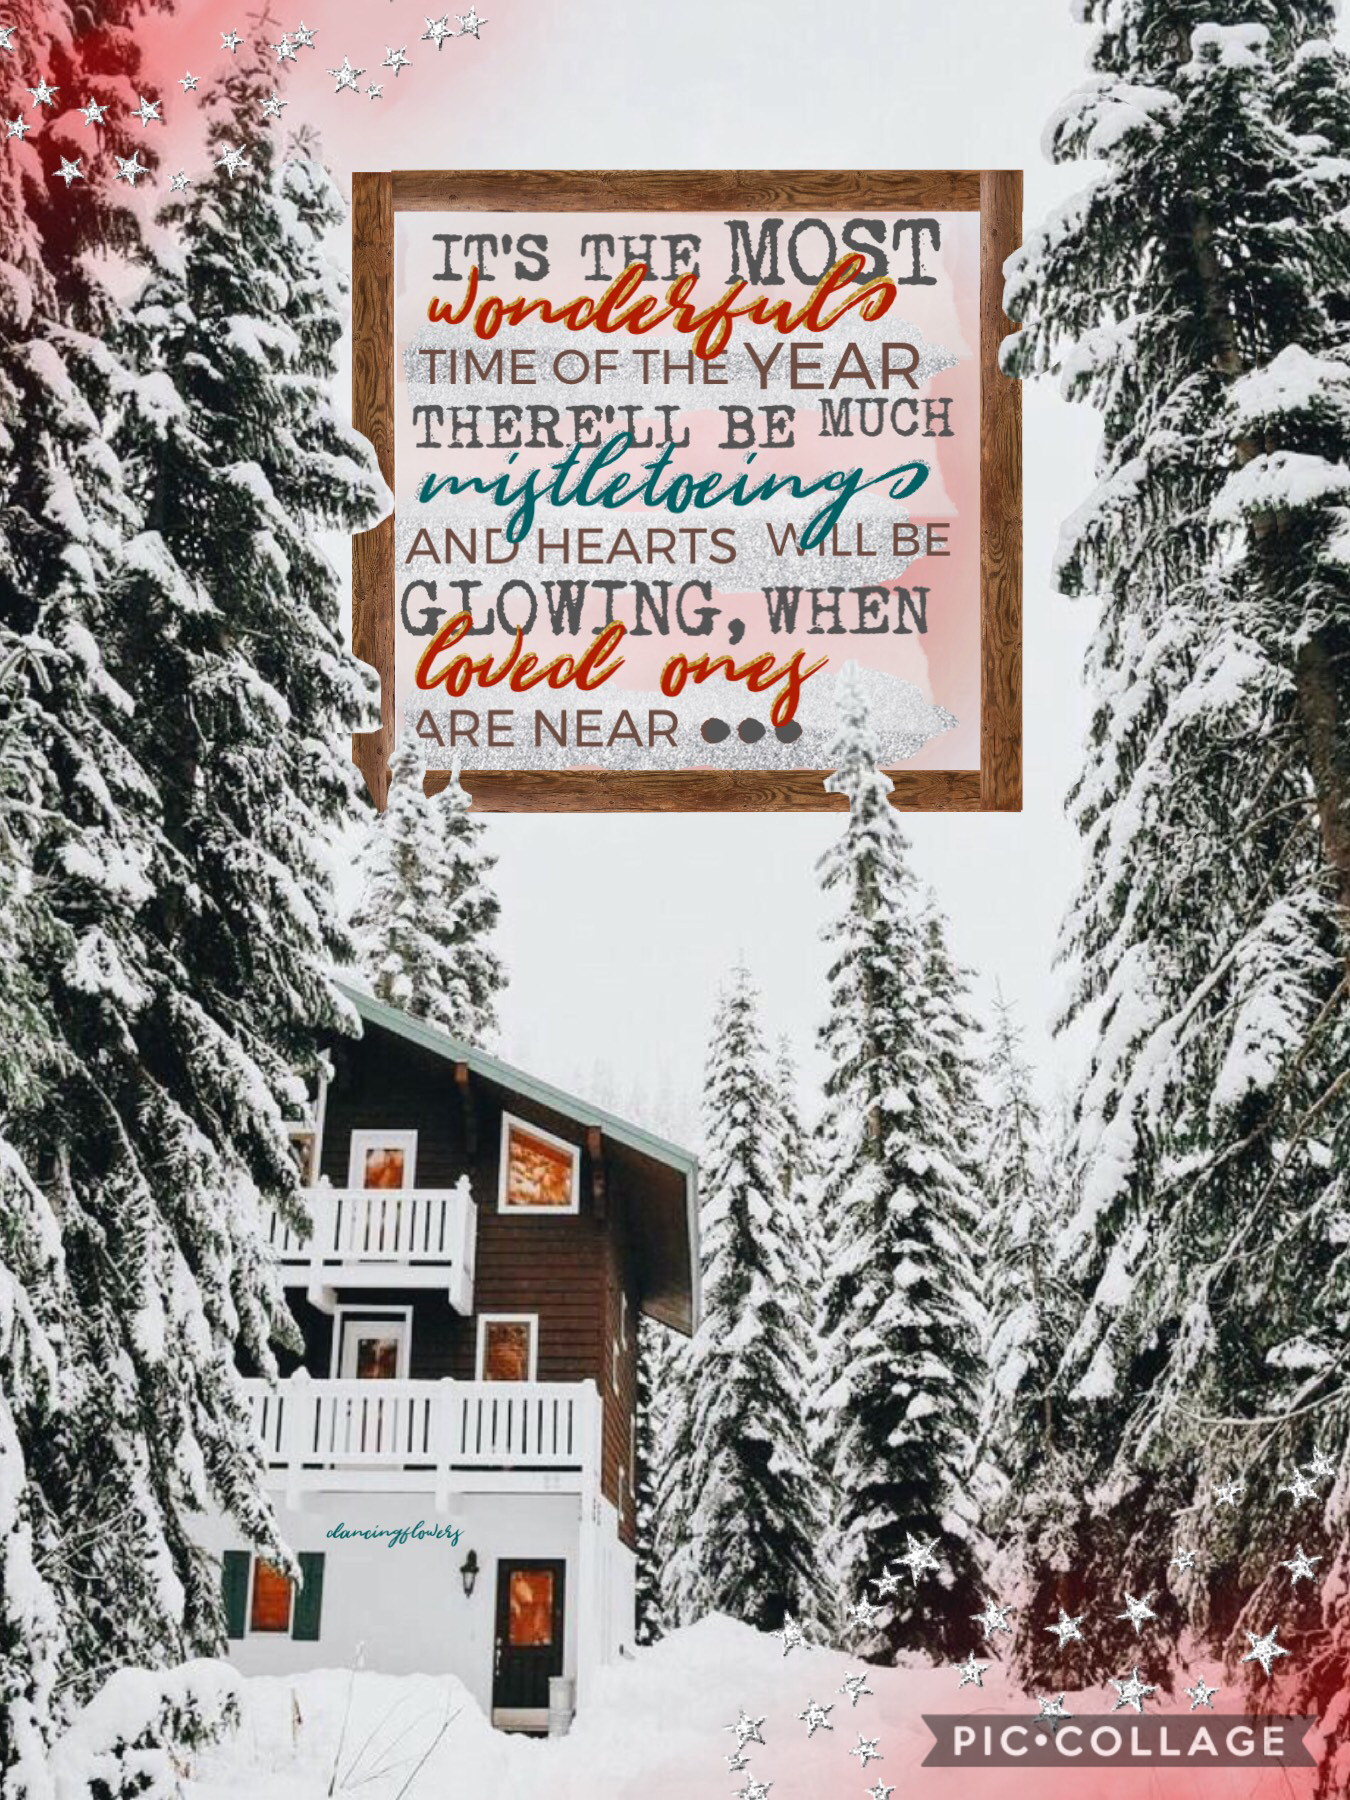 🥰tap🥰
my first collage in a while, not too early for Christmas is it? 😂 also, I am so happy with the new fonts, they are perfect and just what me and many other PicCollagers asked for! What are you all doing for Christmas? 🎄😊